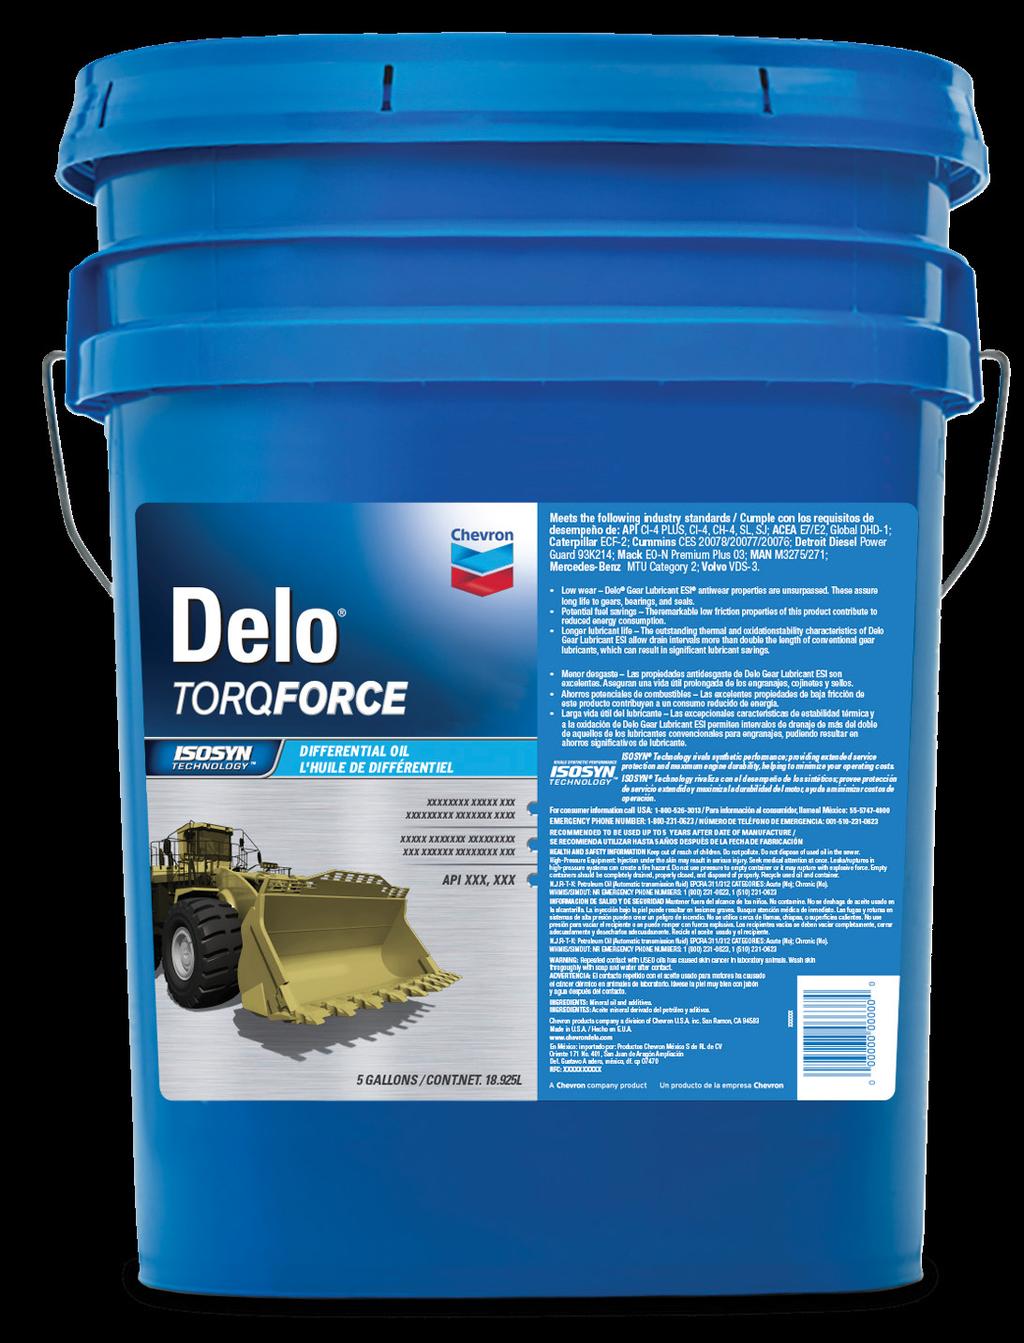 ROBUST PERFORMANCE Covering a Wide Range of OEM Requirements Delo TorqForce products are formulated to protect critical components in off-road equipment operating under high loads and severe service